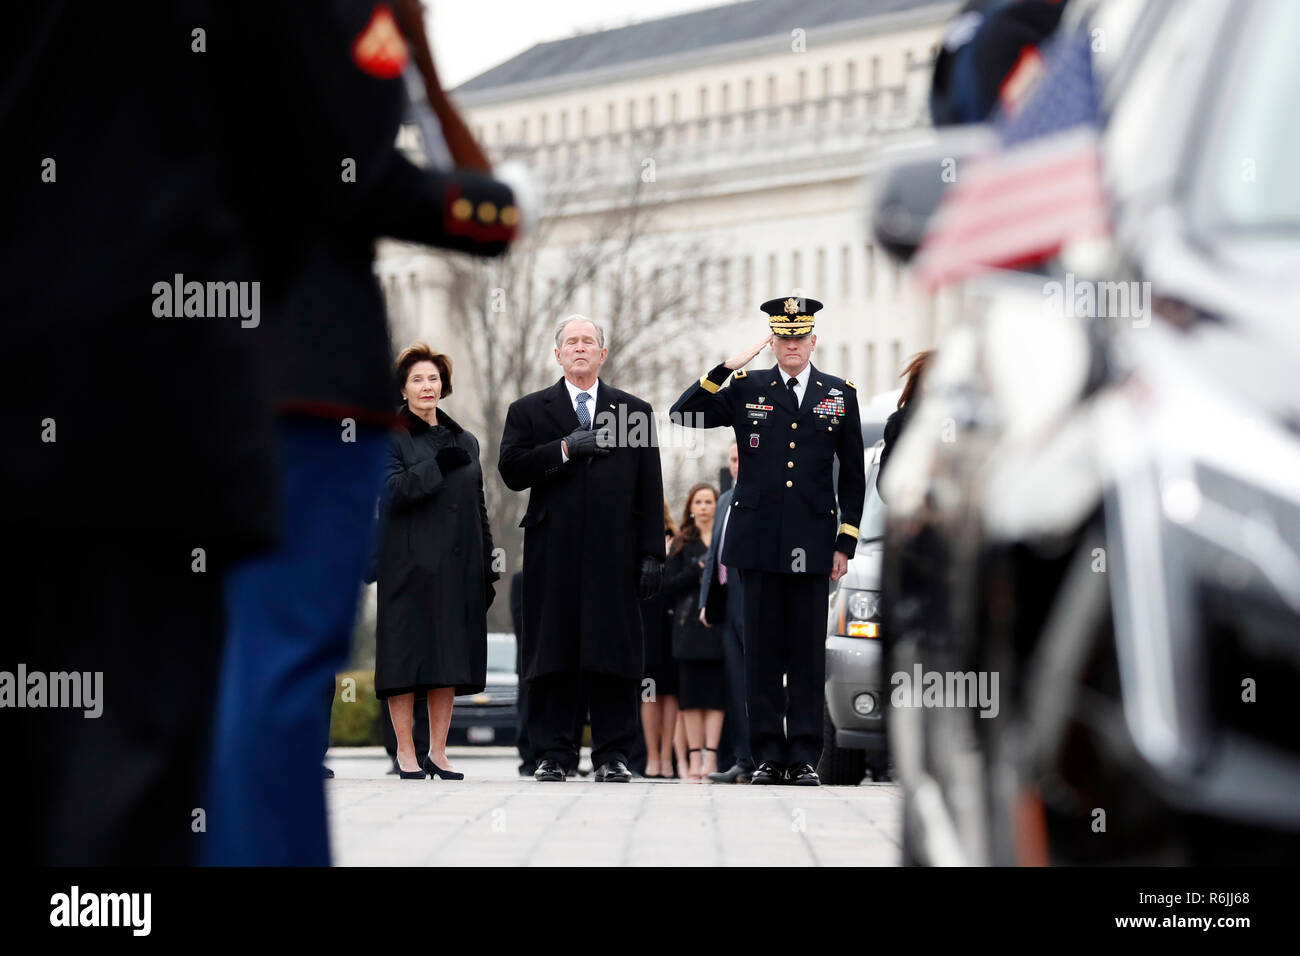 The flag-draped casket of former President George H.W. Bush is carried by a joint services military honor guard from the U.S. Capitol, Wednesday, Dec. 5, 2018, in Washington.  Credit: Alex Brandon / Pool via CNP | usage worldwide Stock Photo